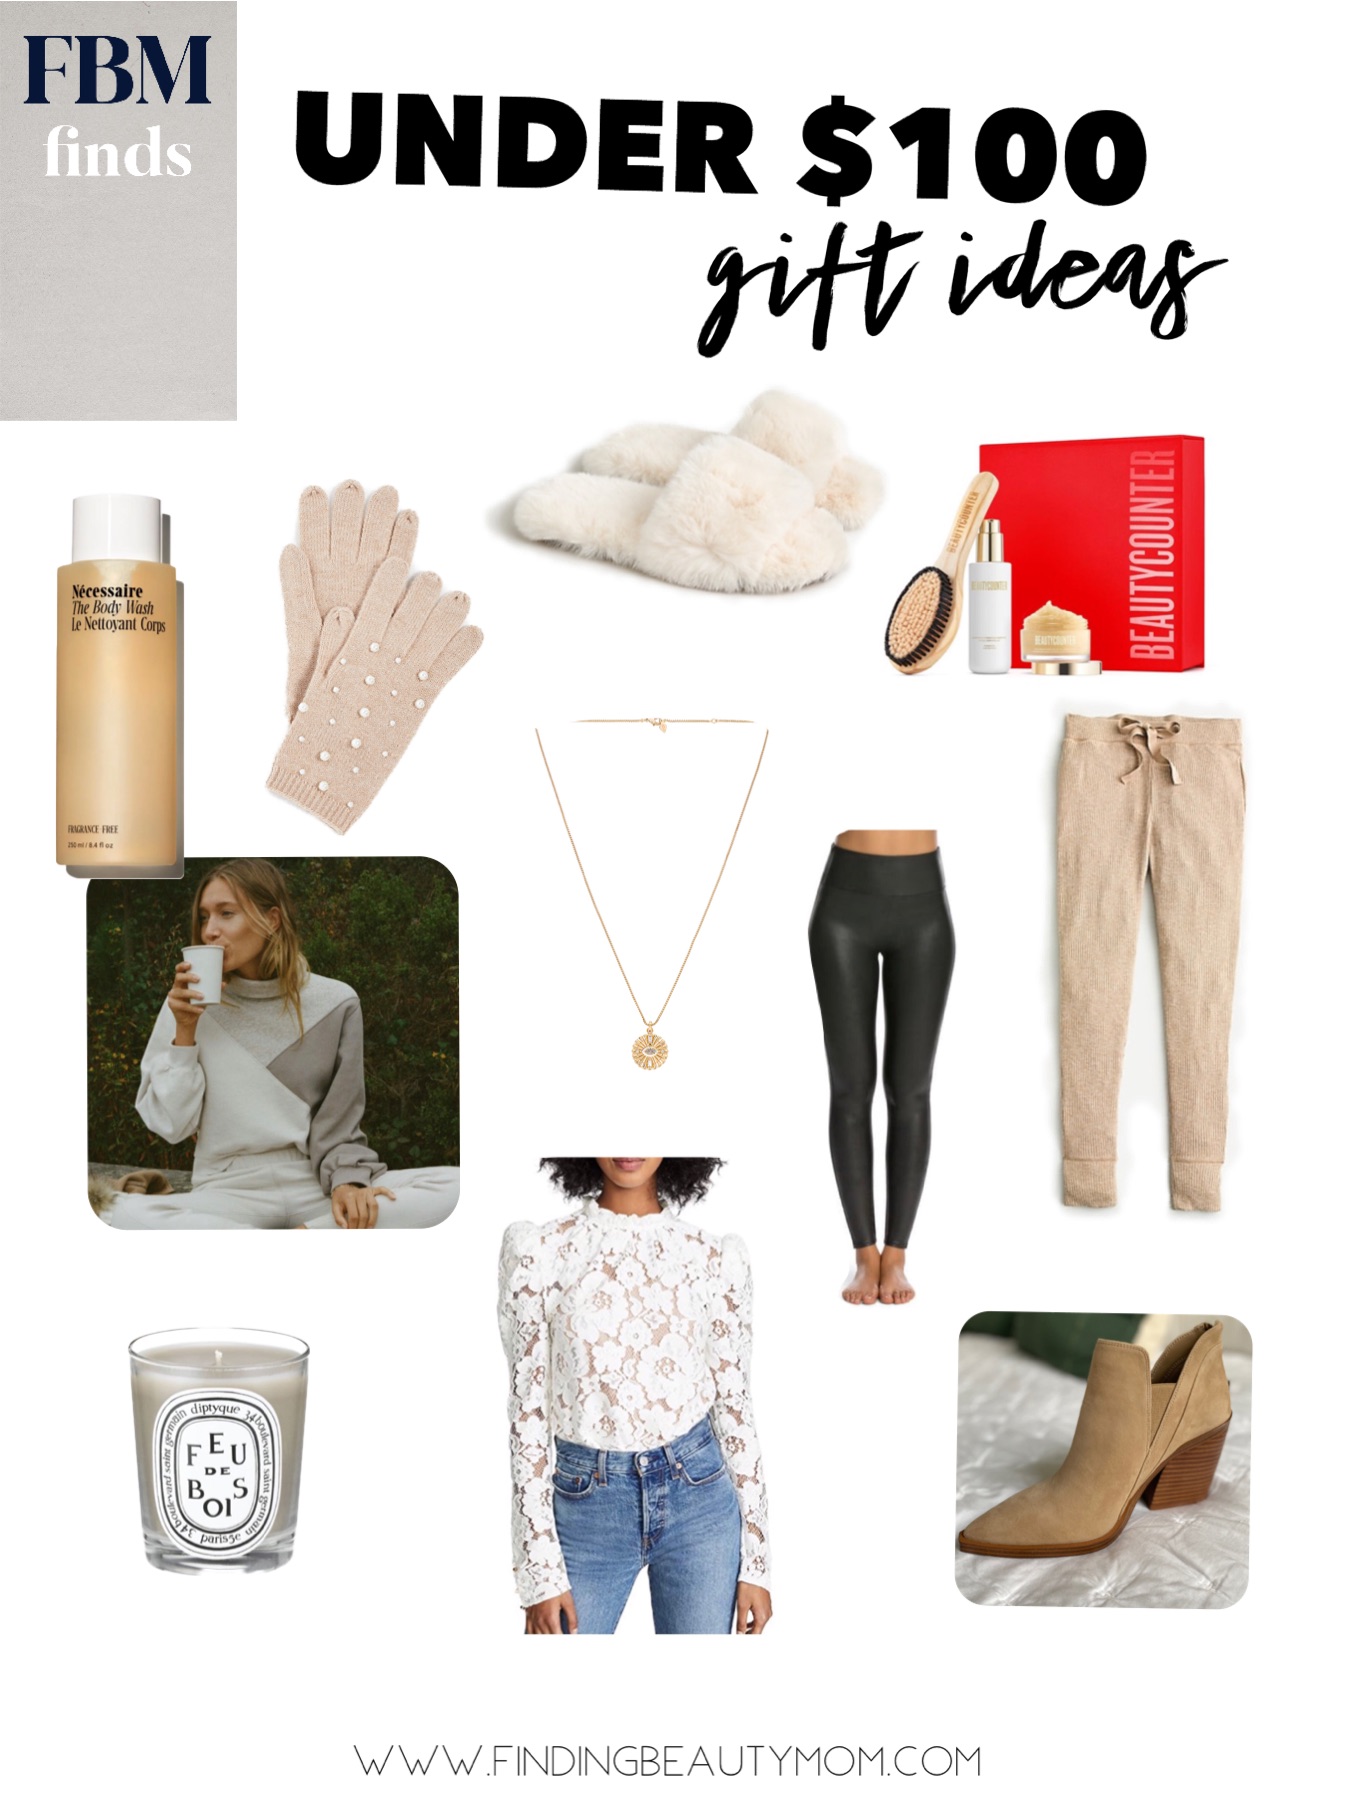 Under $100 gift ideas for her, Valentine’s Day gifts for her, finding beauty mom gift ideas 